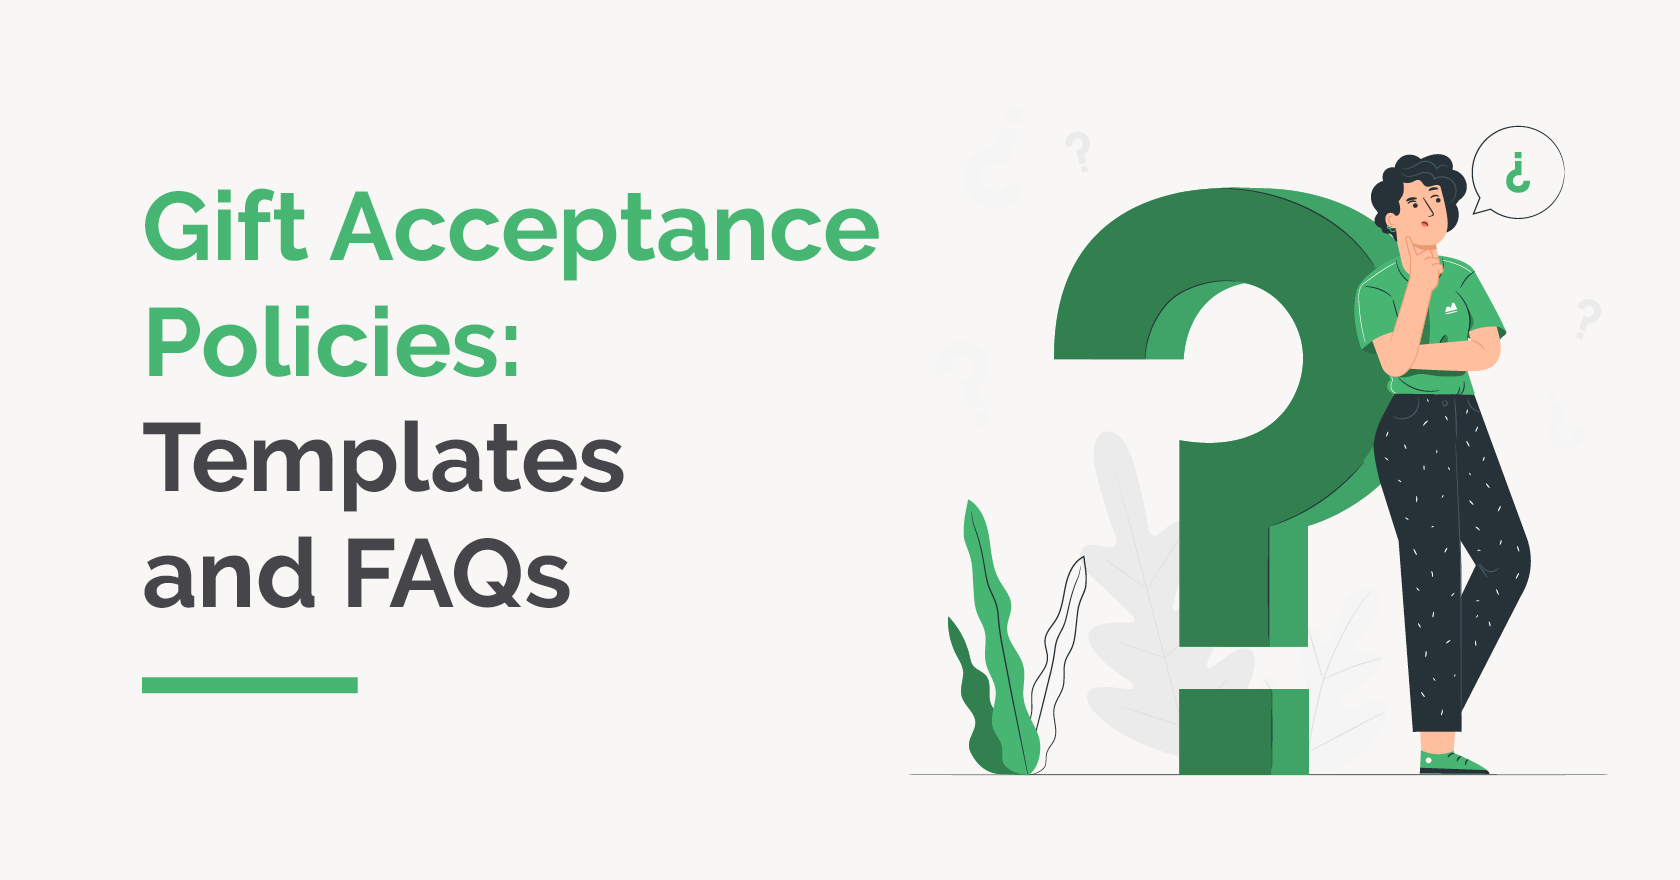 Guide to gift acceptance policies for nonprofits